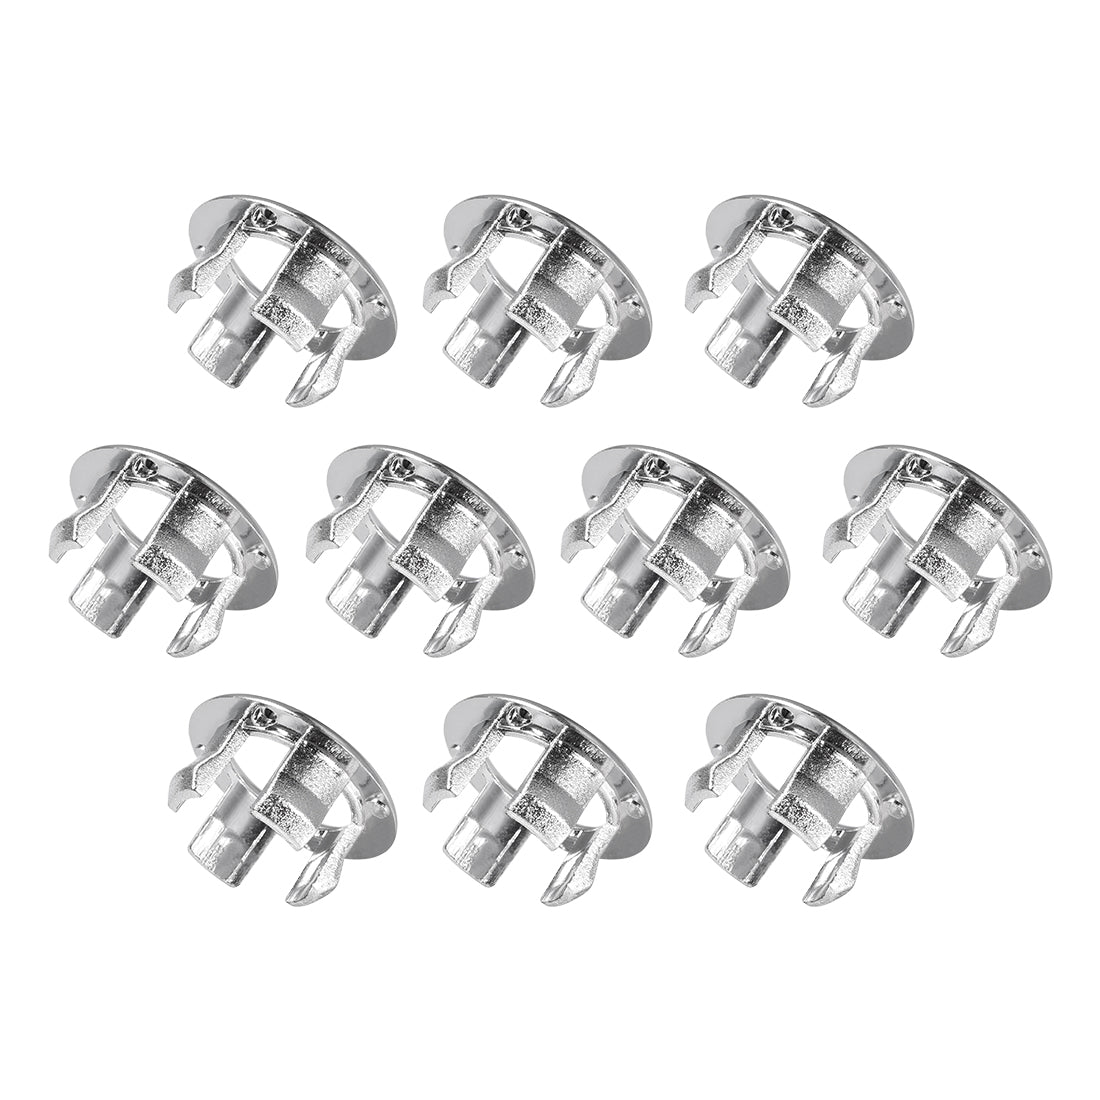 uxcell Uxcell Sink Overflow Covers Bathroom Kitchen Basin Trim Round Hole Caps Insert Spares Silver Tone 10 Pcs